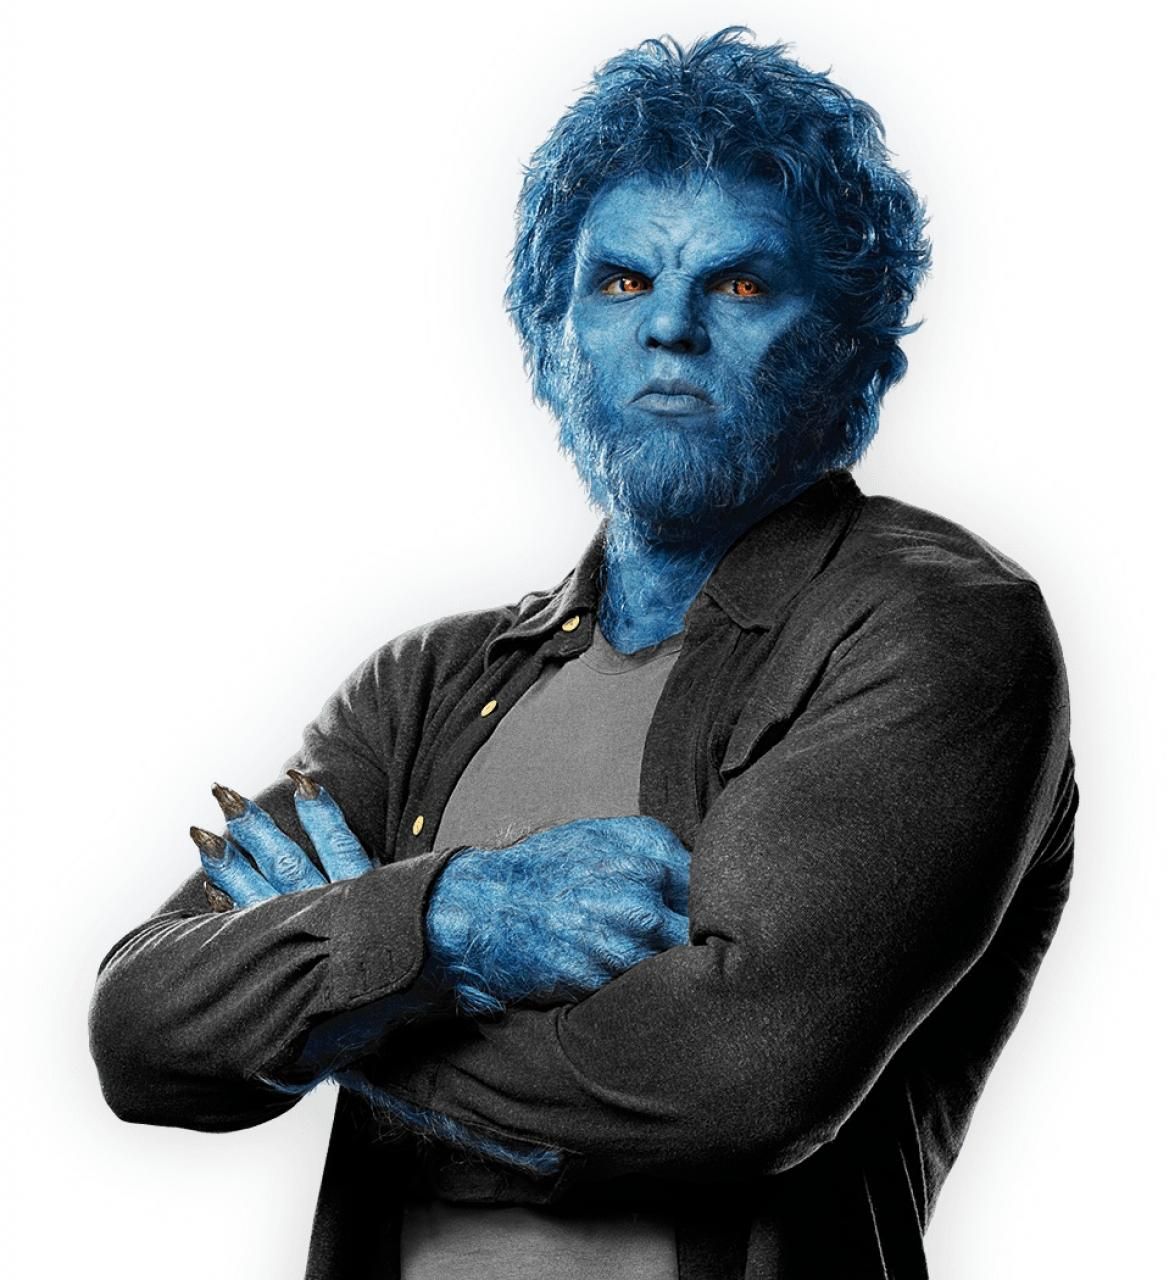 X-men: Days of Future Past character photo #4